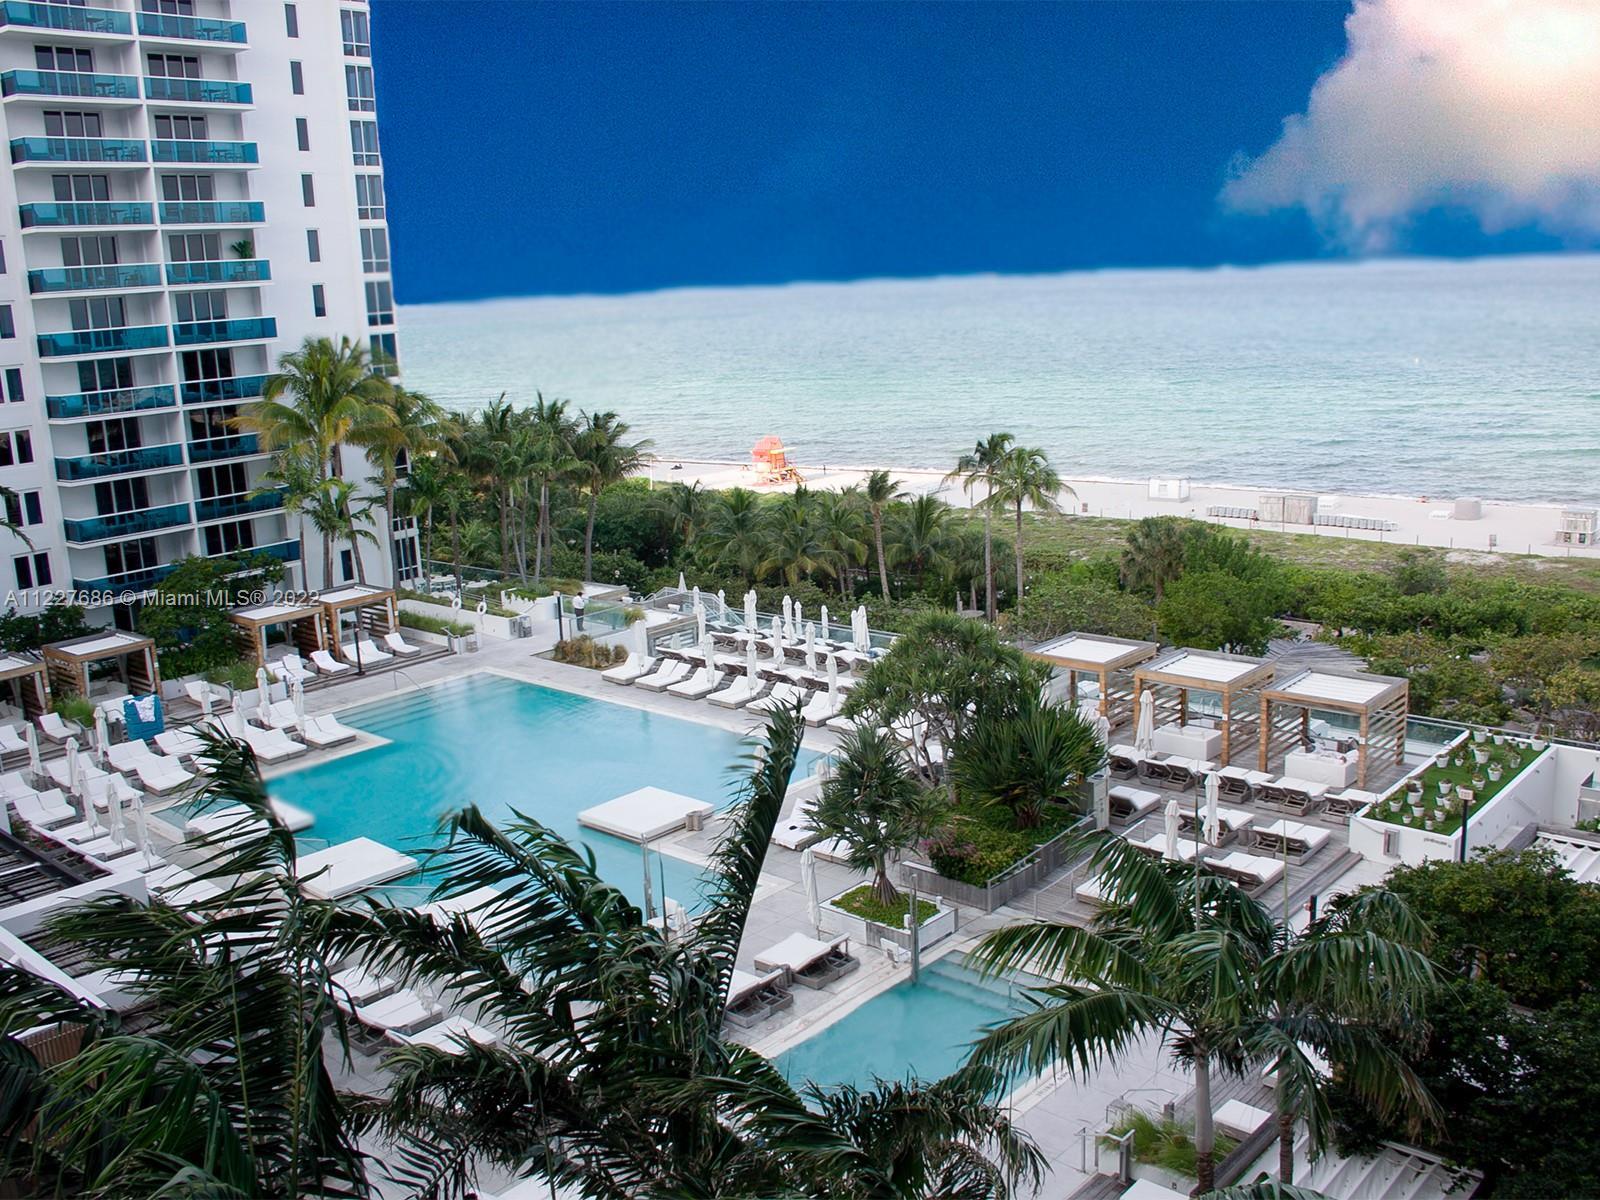 Amazing Oceanfront Condo, Great View, balcony faces the 1 hotel Main pool and ocean. The Roney Palac